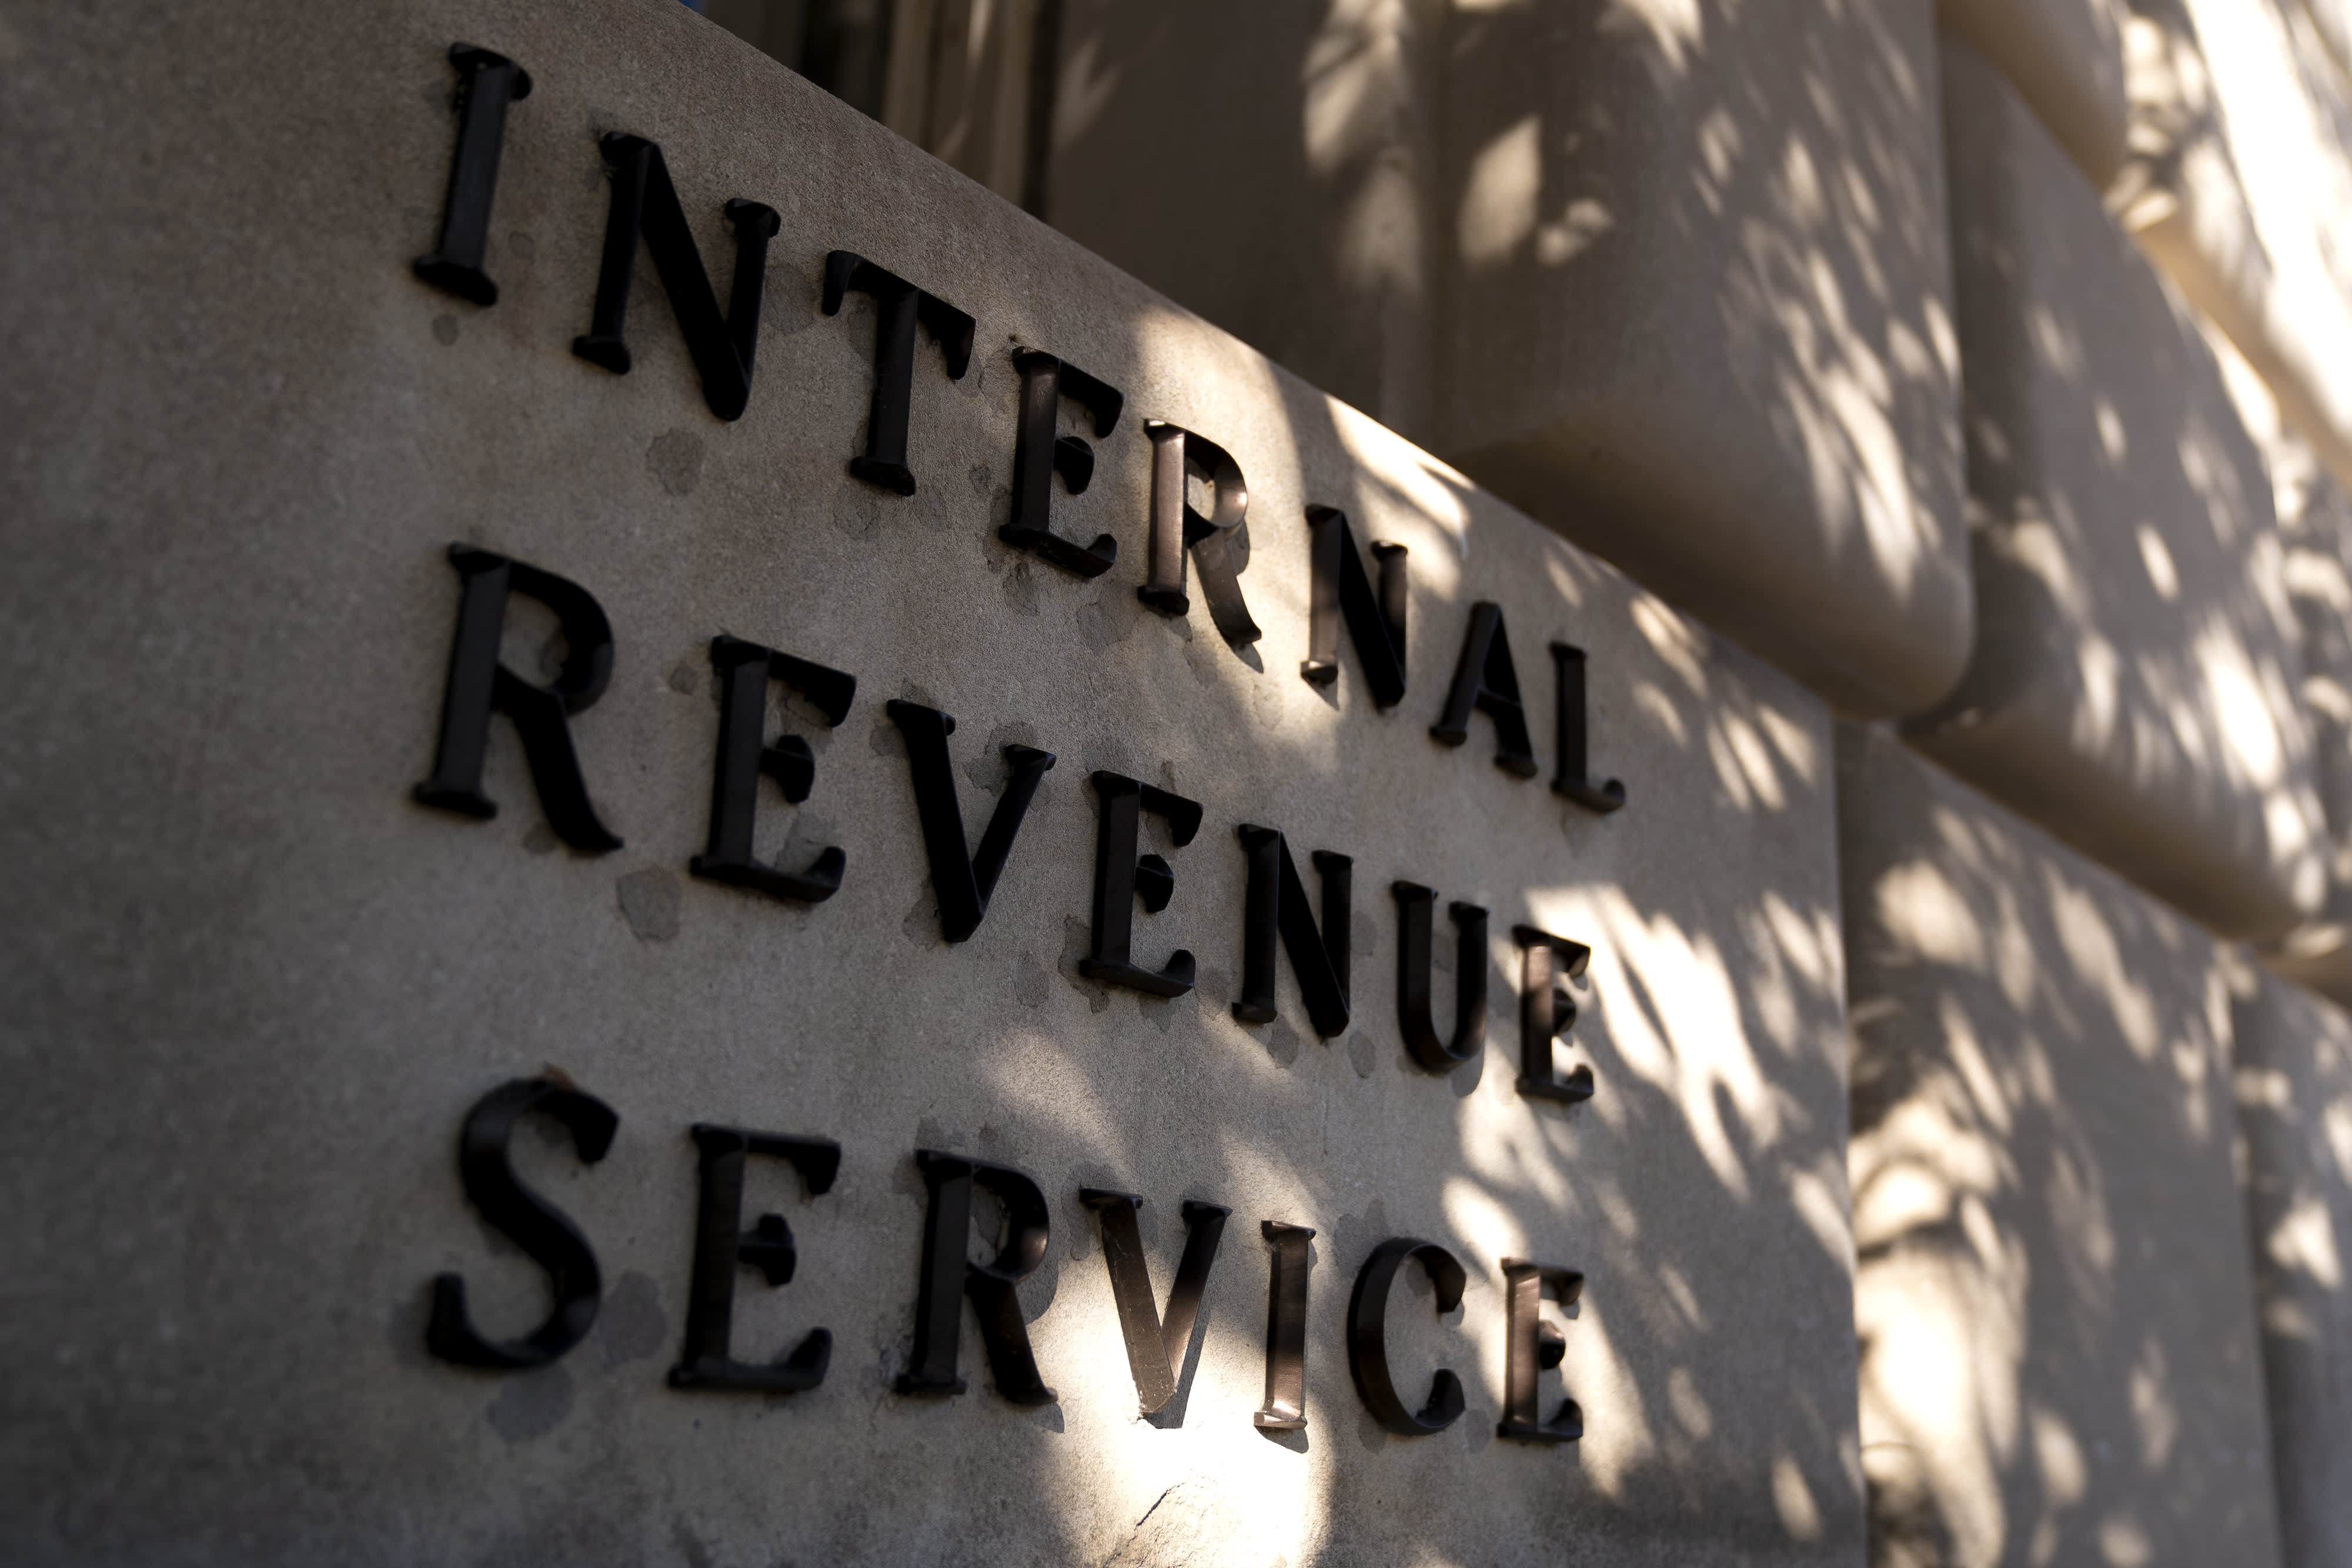 IRS may have paid $57 million in error for Trump tax break, report finds - CNBC